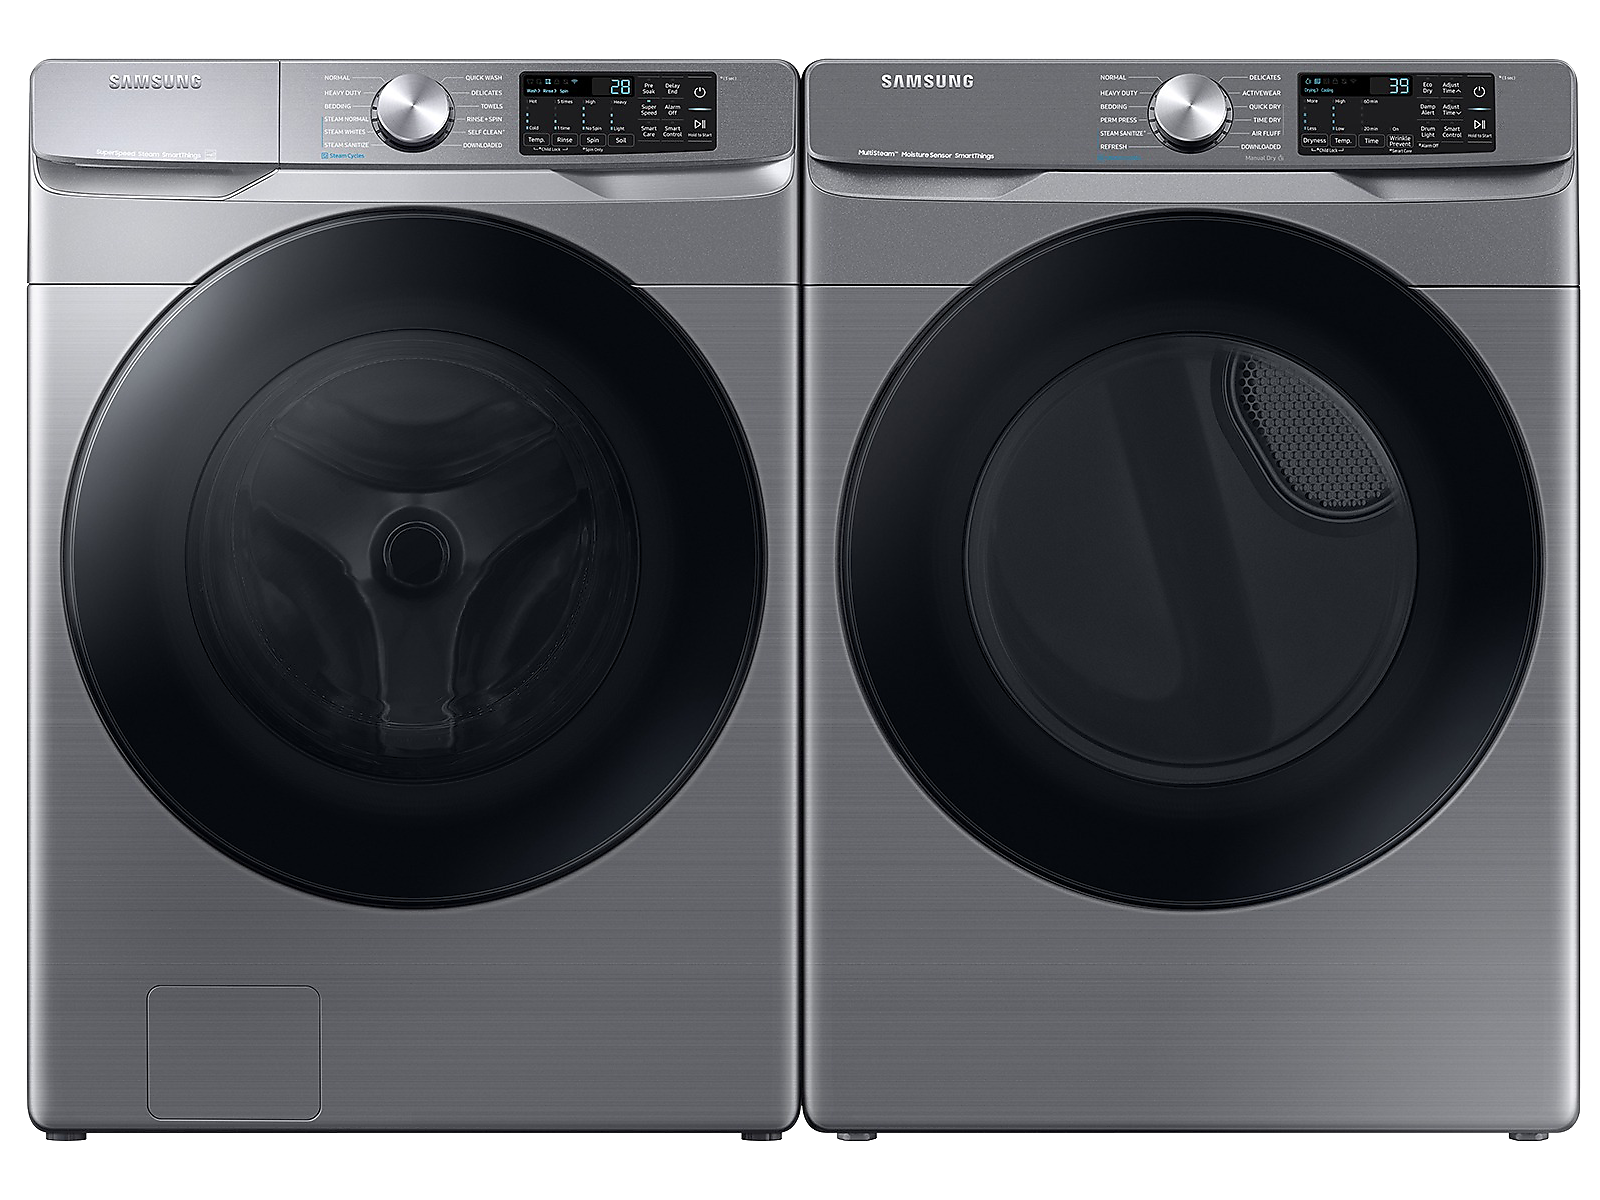 Samsung Large Capacity Smart Front Load Washer with Super Speed Wash & Smart Electric Dryer with Steam Sanitize+ in Platinum(BNDL-1651774560331) photo